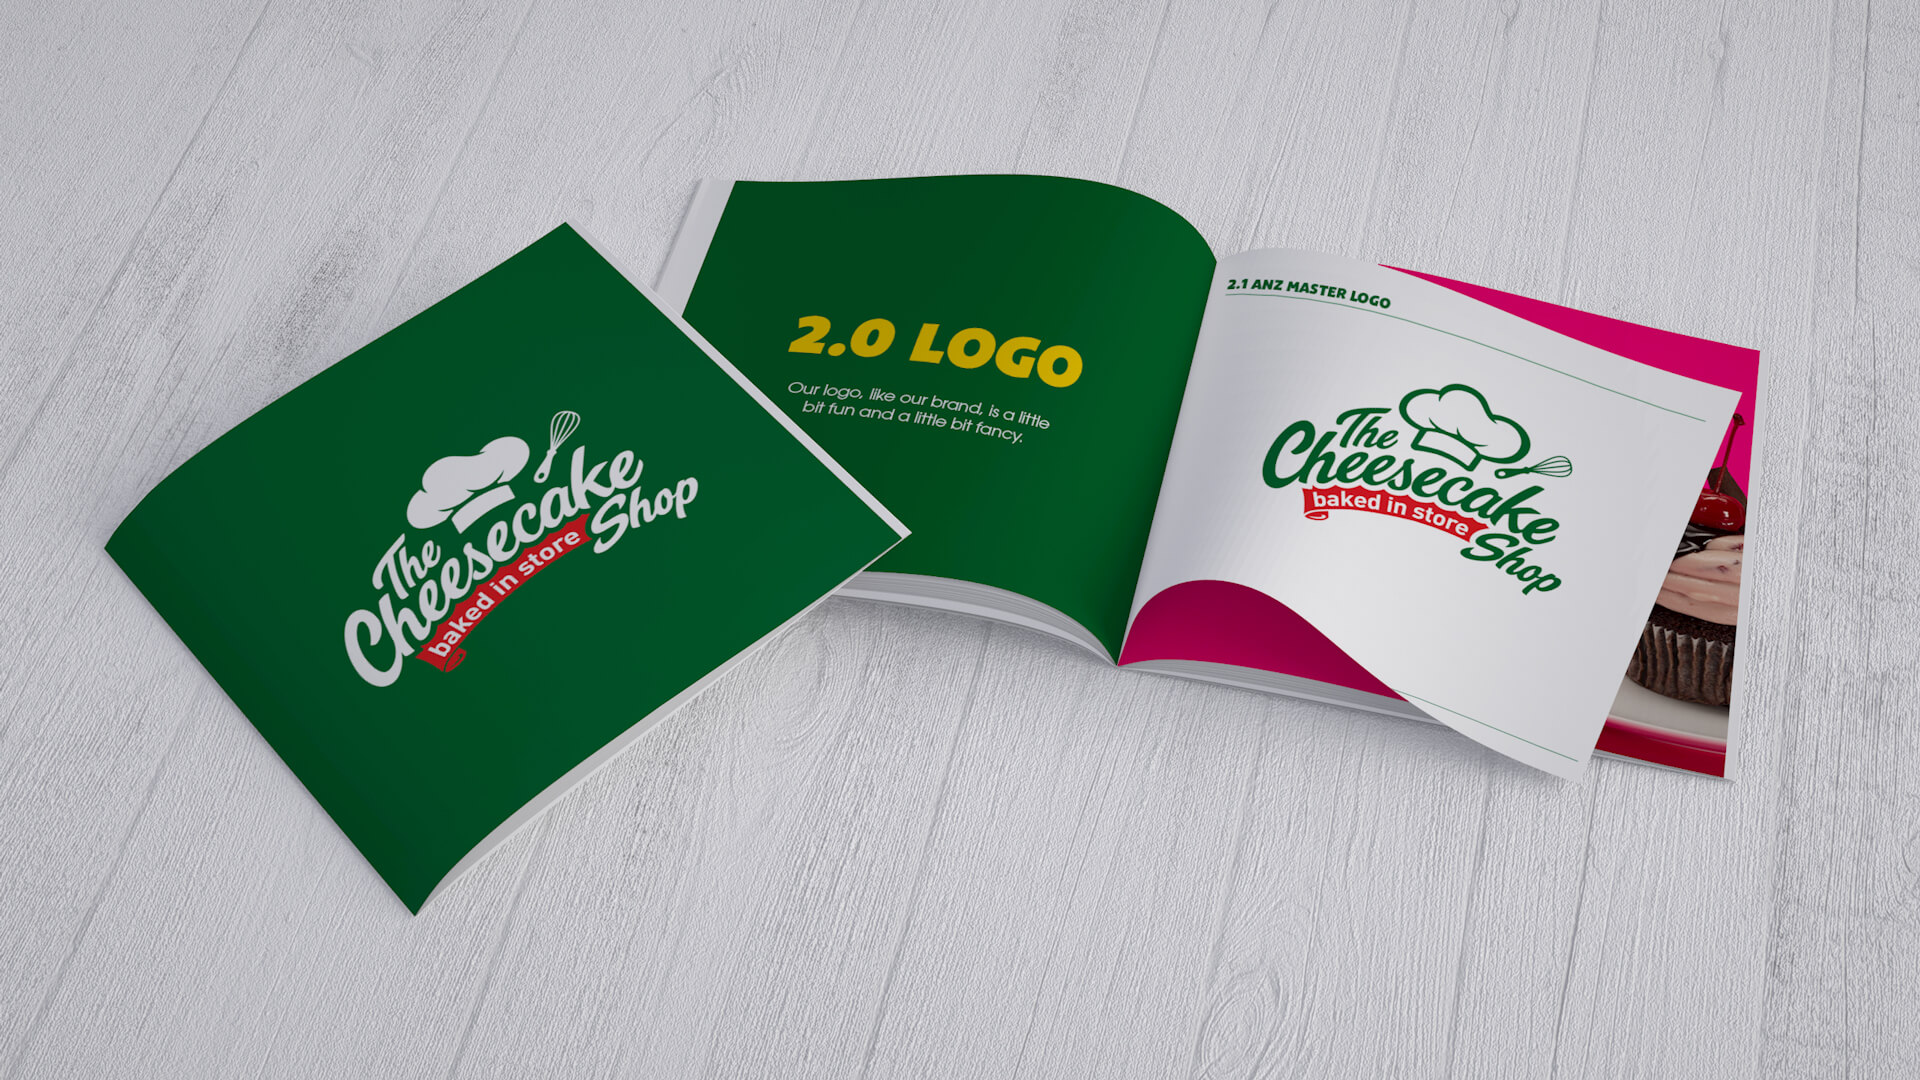 Marketing and Design Agency - Poloko - Northern Beaches - Cheesecake Shop